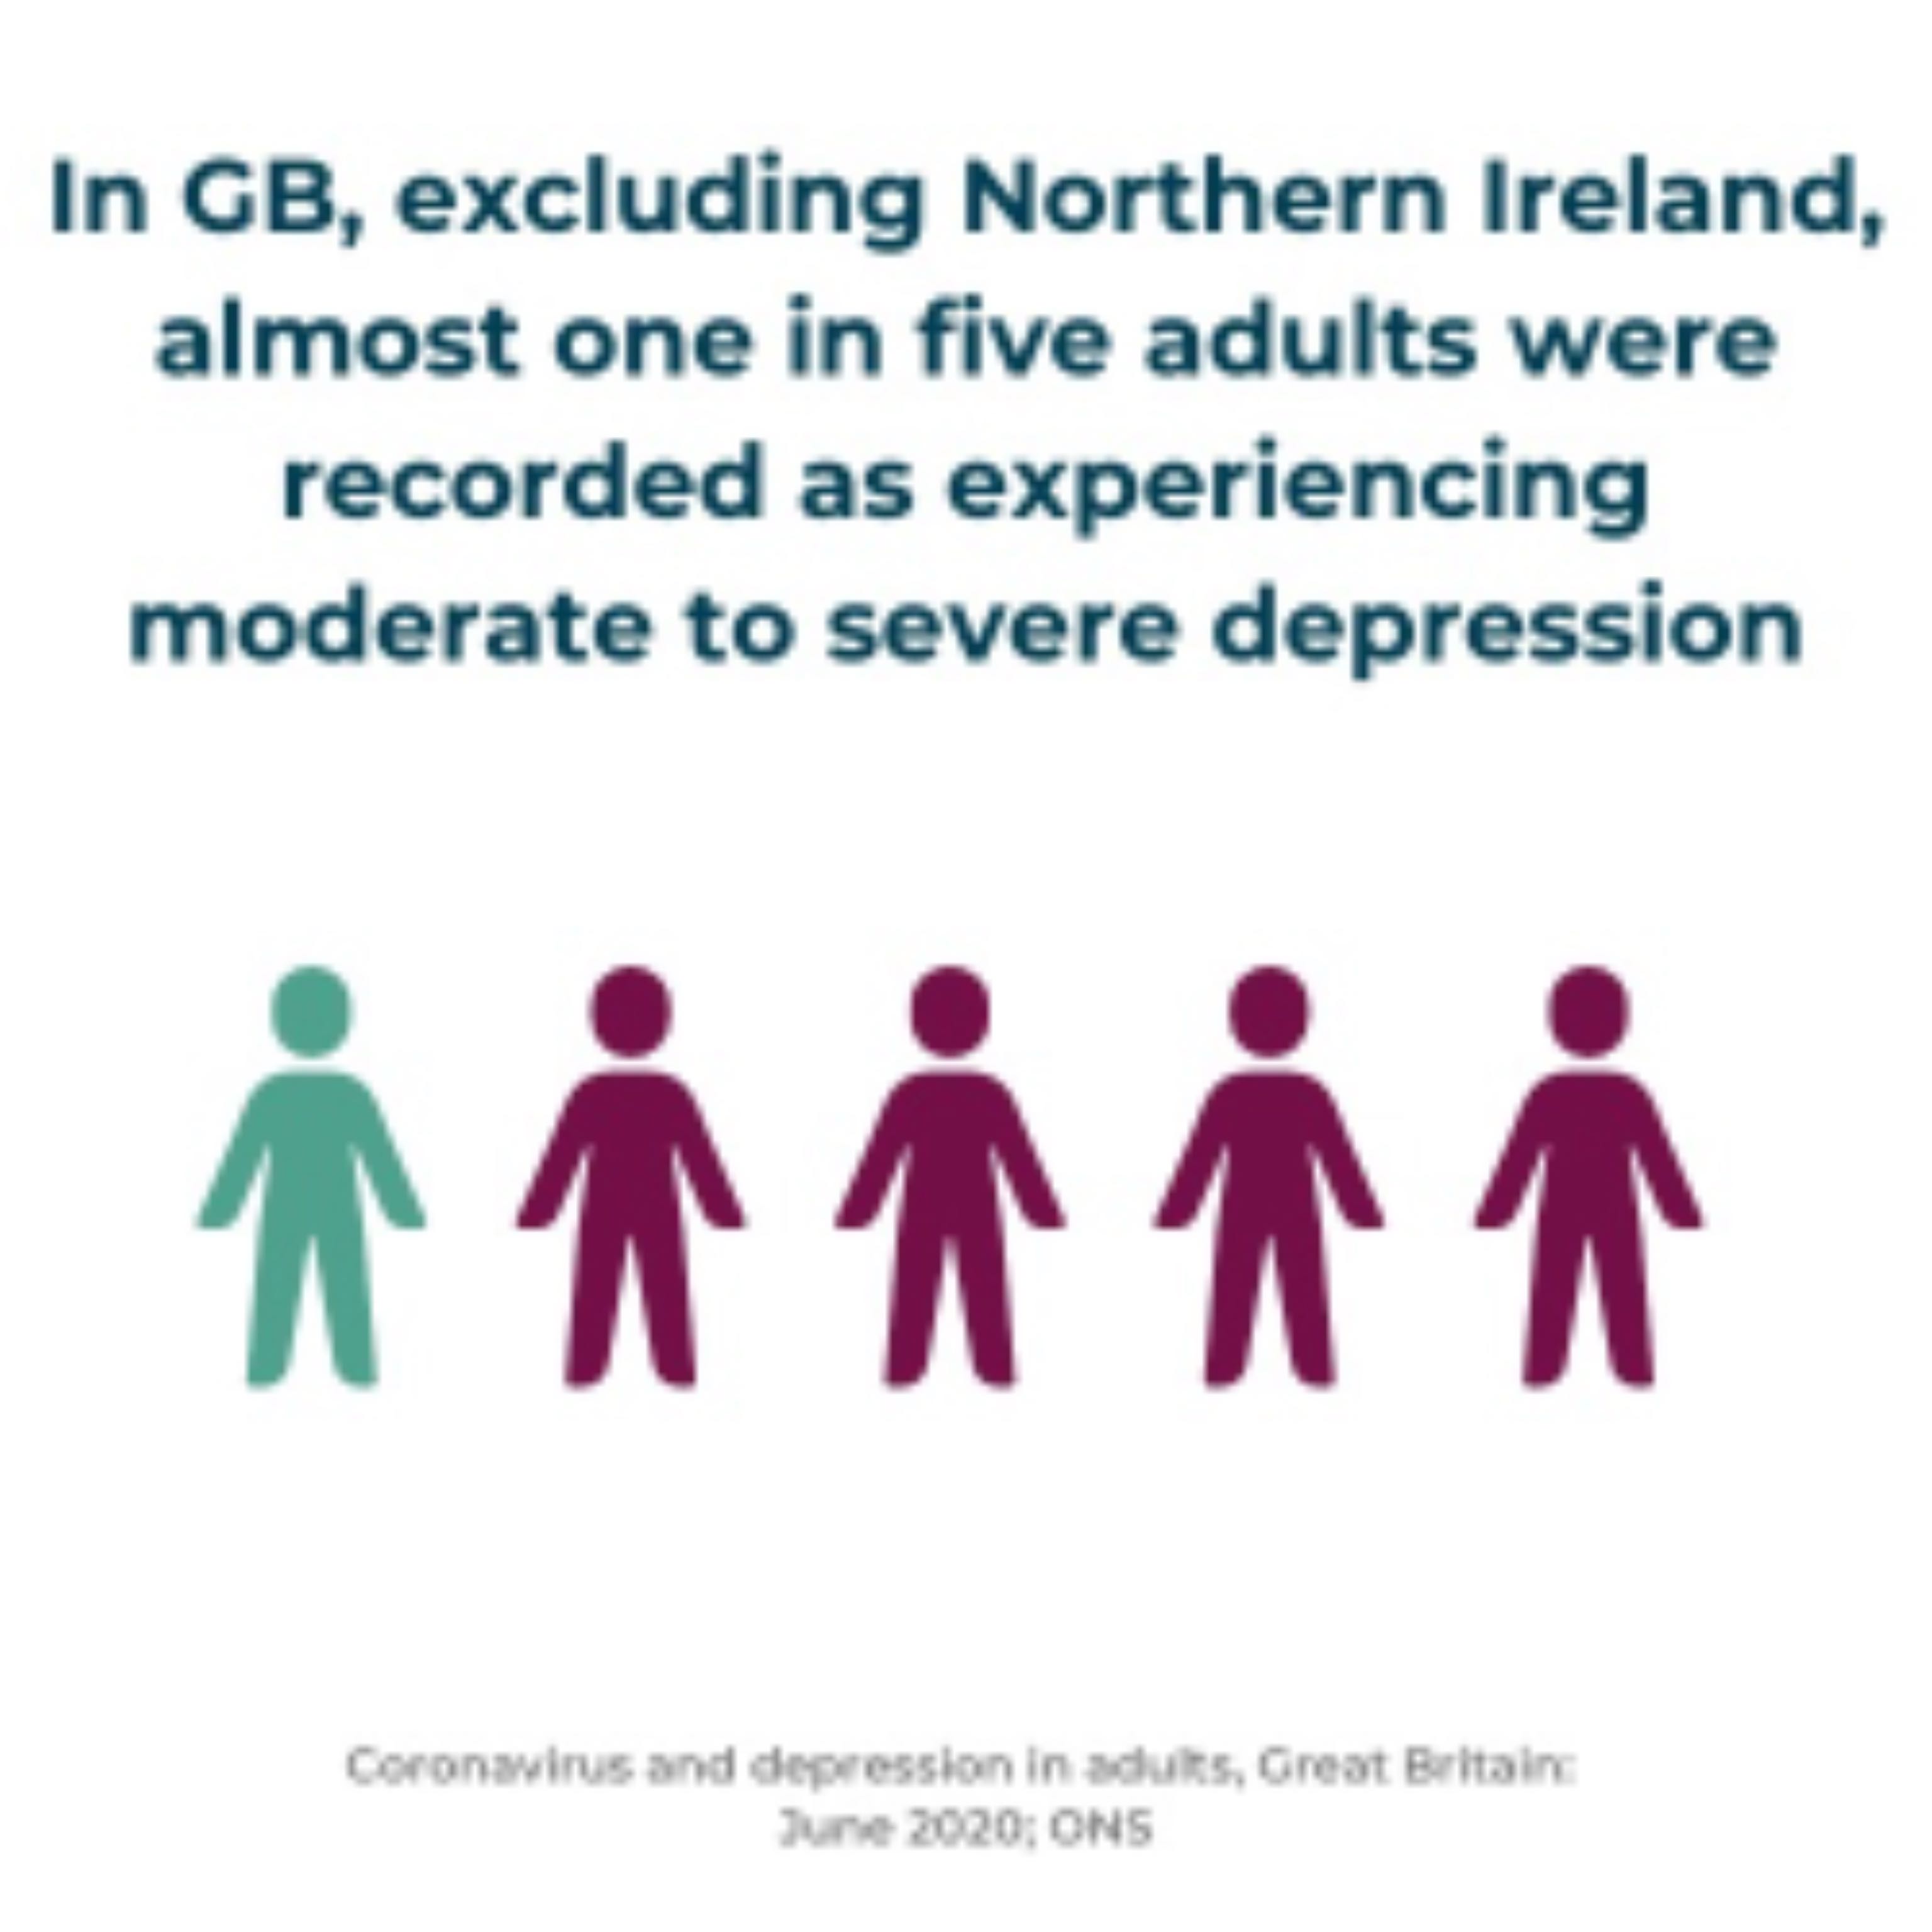 In the UK excluding Northern Ireland 1 in 5 adults experienced moderate to severe depression